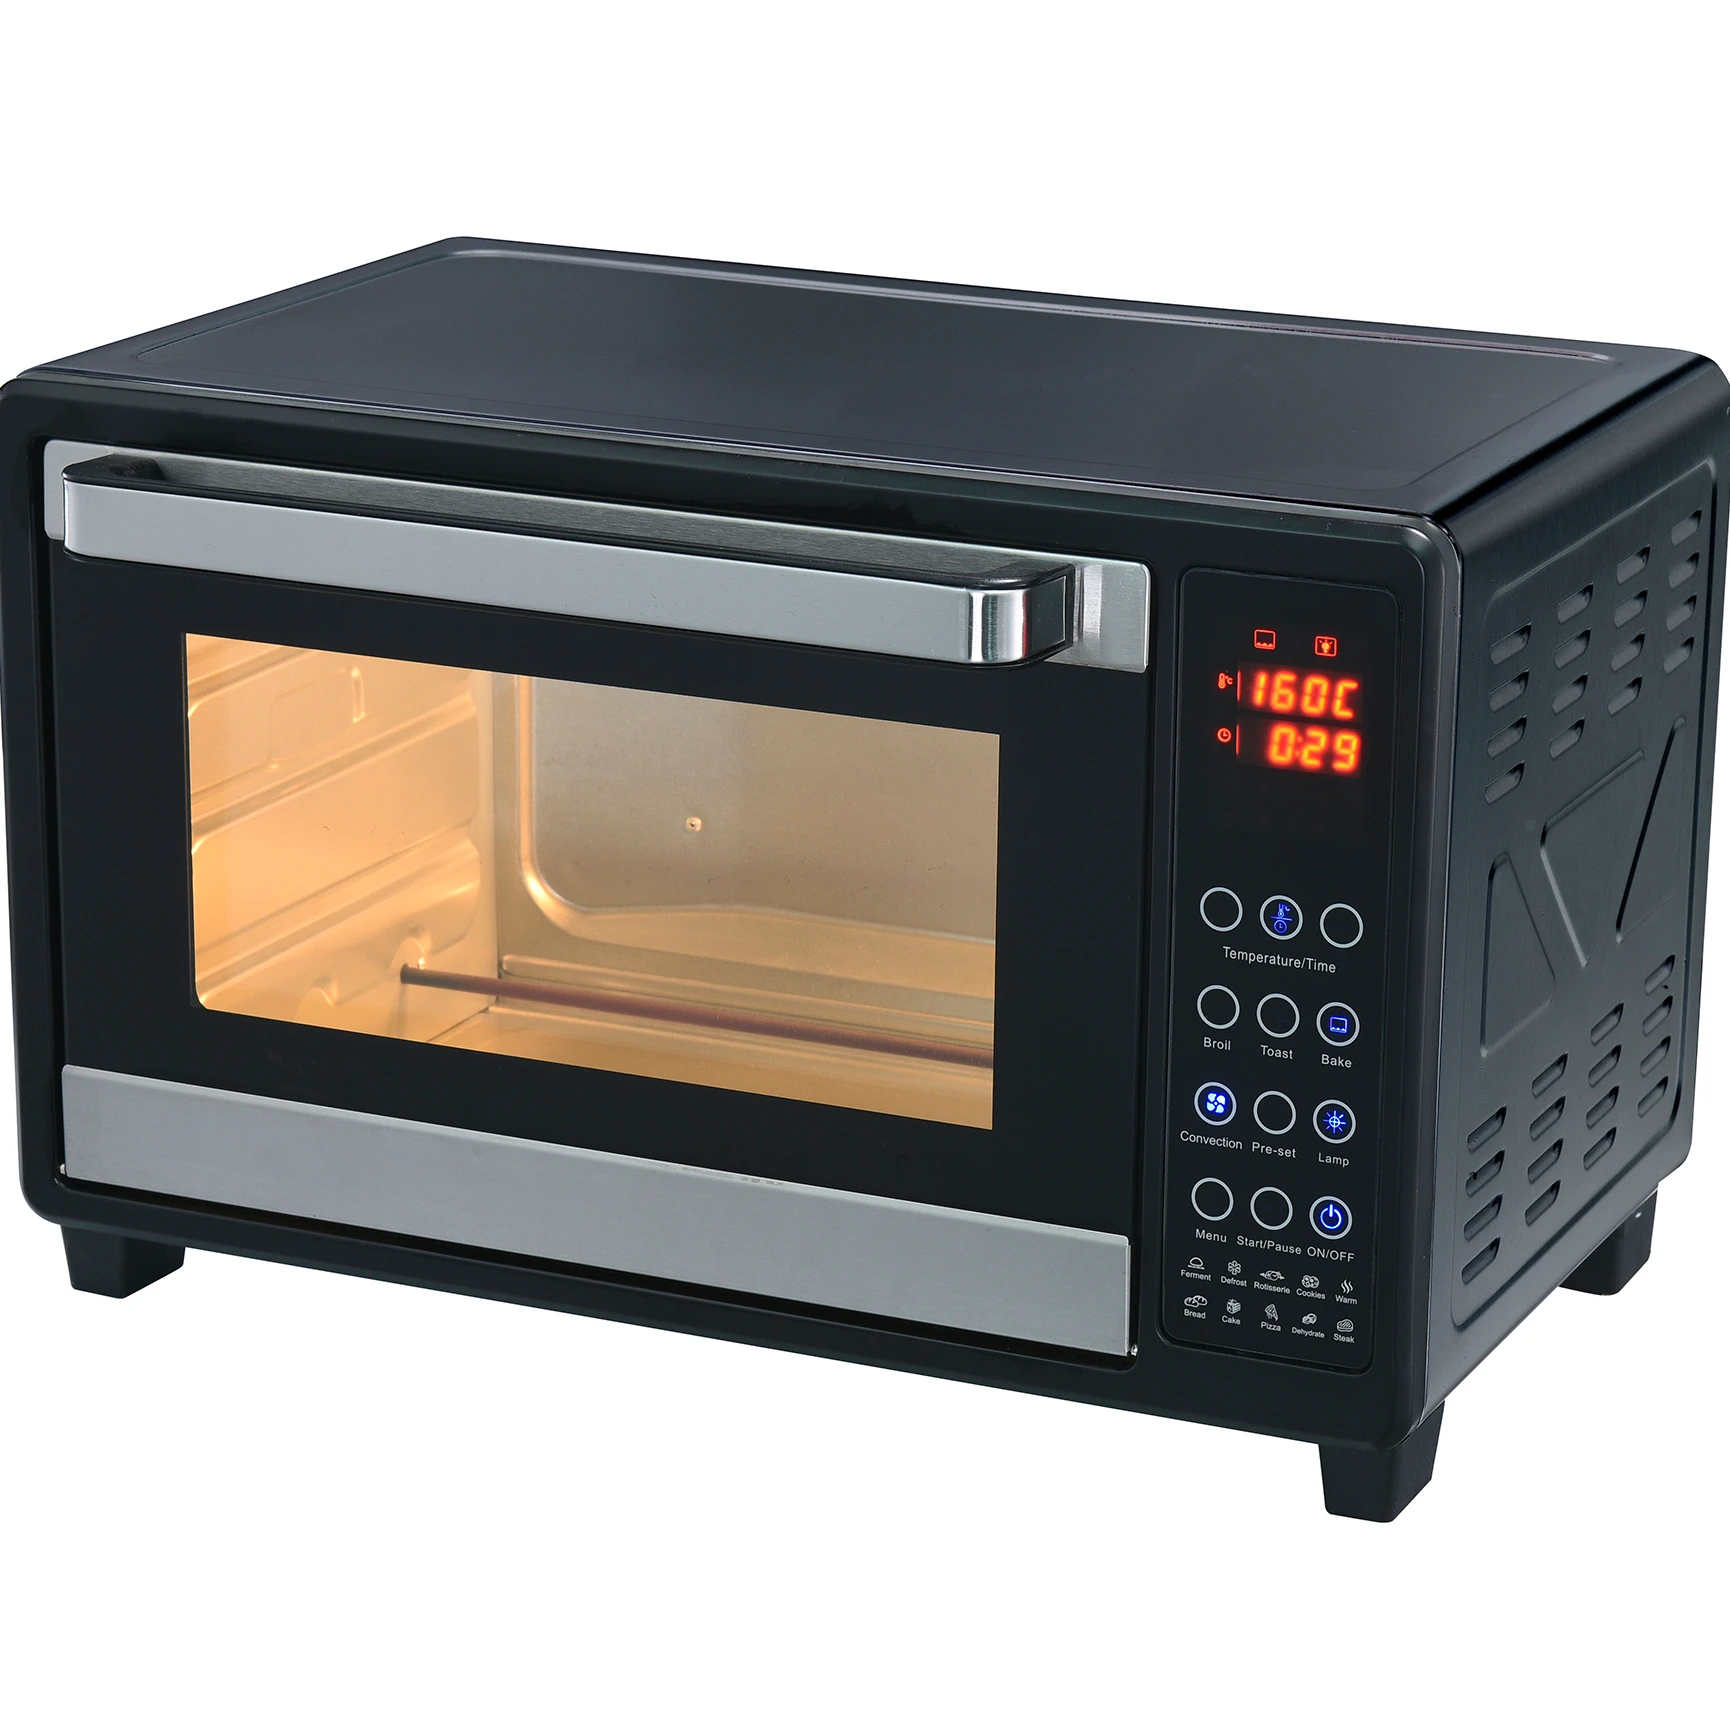 Nog steeds Annoteren Hick Posida 35l Large Capacity Digital Touch Control Oven Multifunctional  Electric Oven - Buy Digital Oven,Electric Oven,Oven Product on Alibaba.com